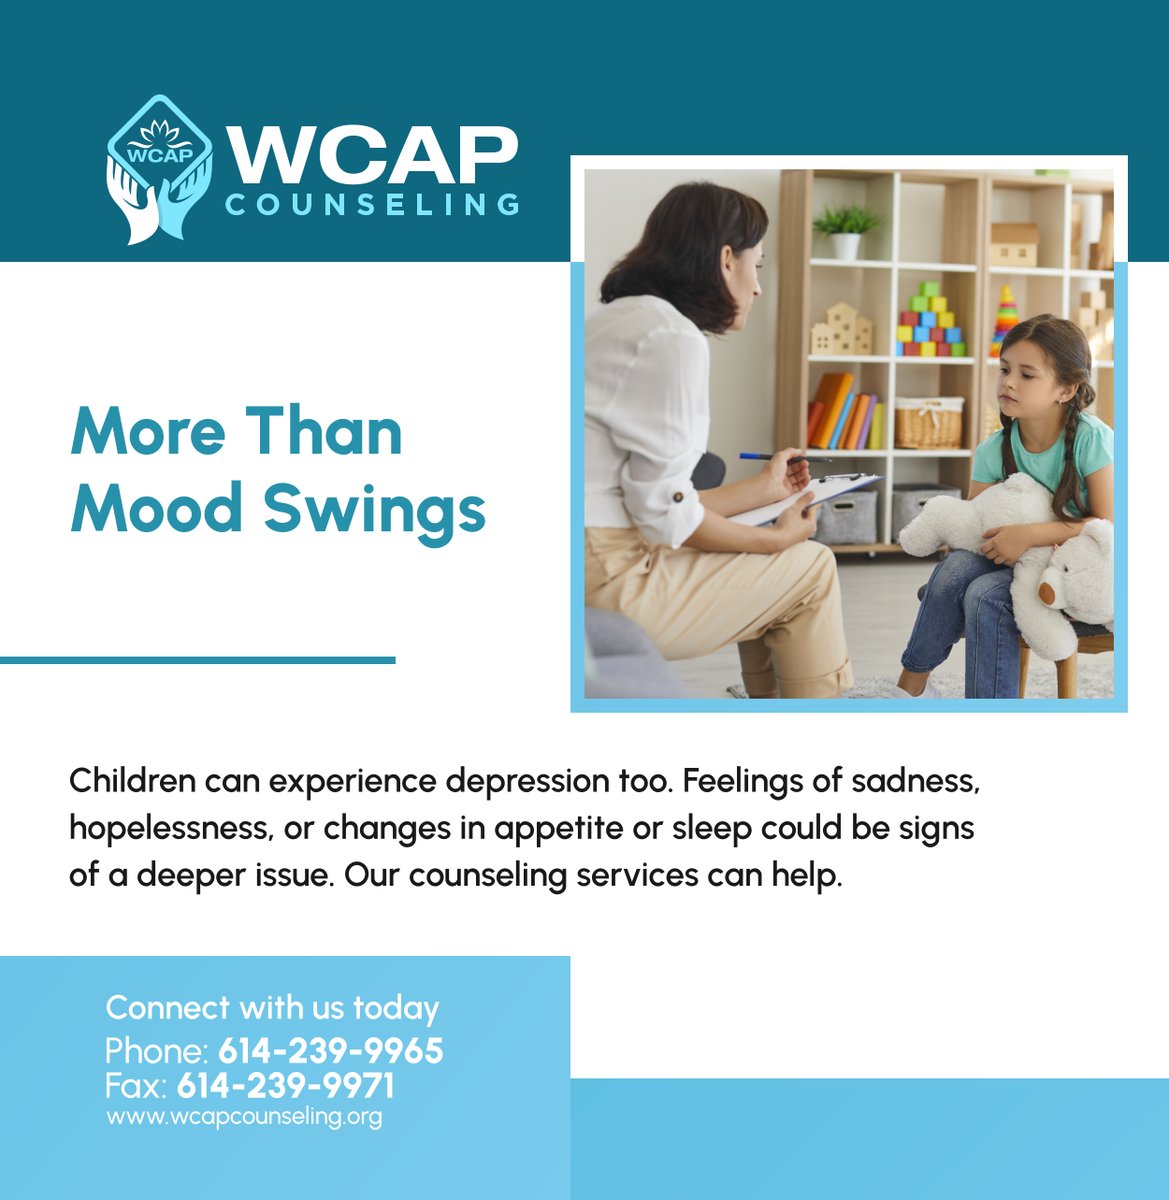 Don't dismiss your child's low mood as typical teenage angst. Depression can affect children of all ages. Our therapists can provide compassionate support and effective treatment for childhood depression. 

#ChildhoodDepression #CounselingServices #ReynoldsburgOH